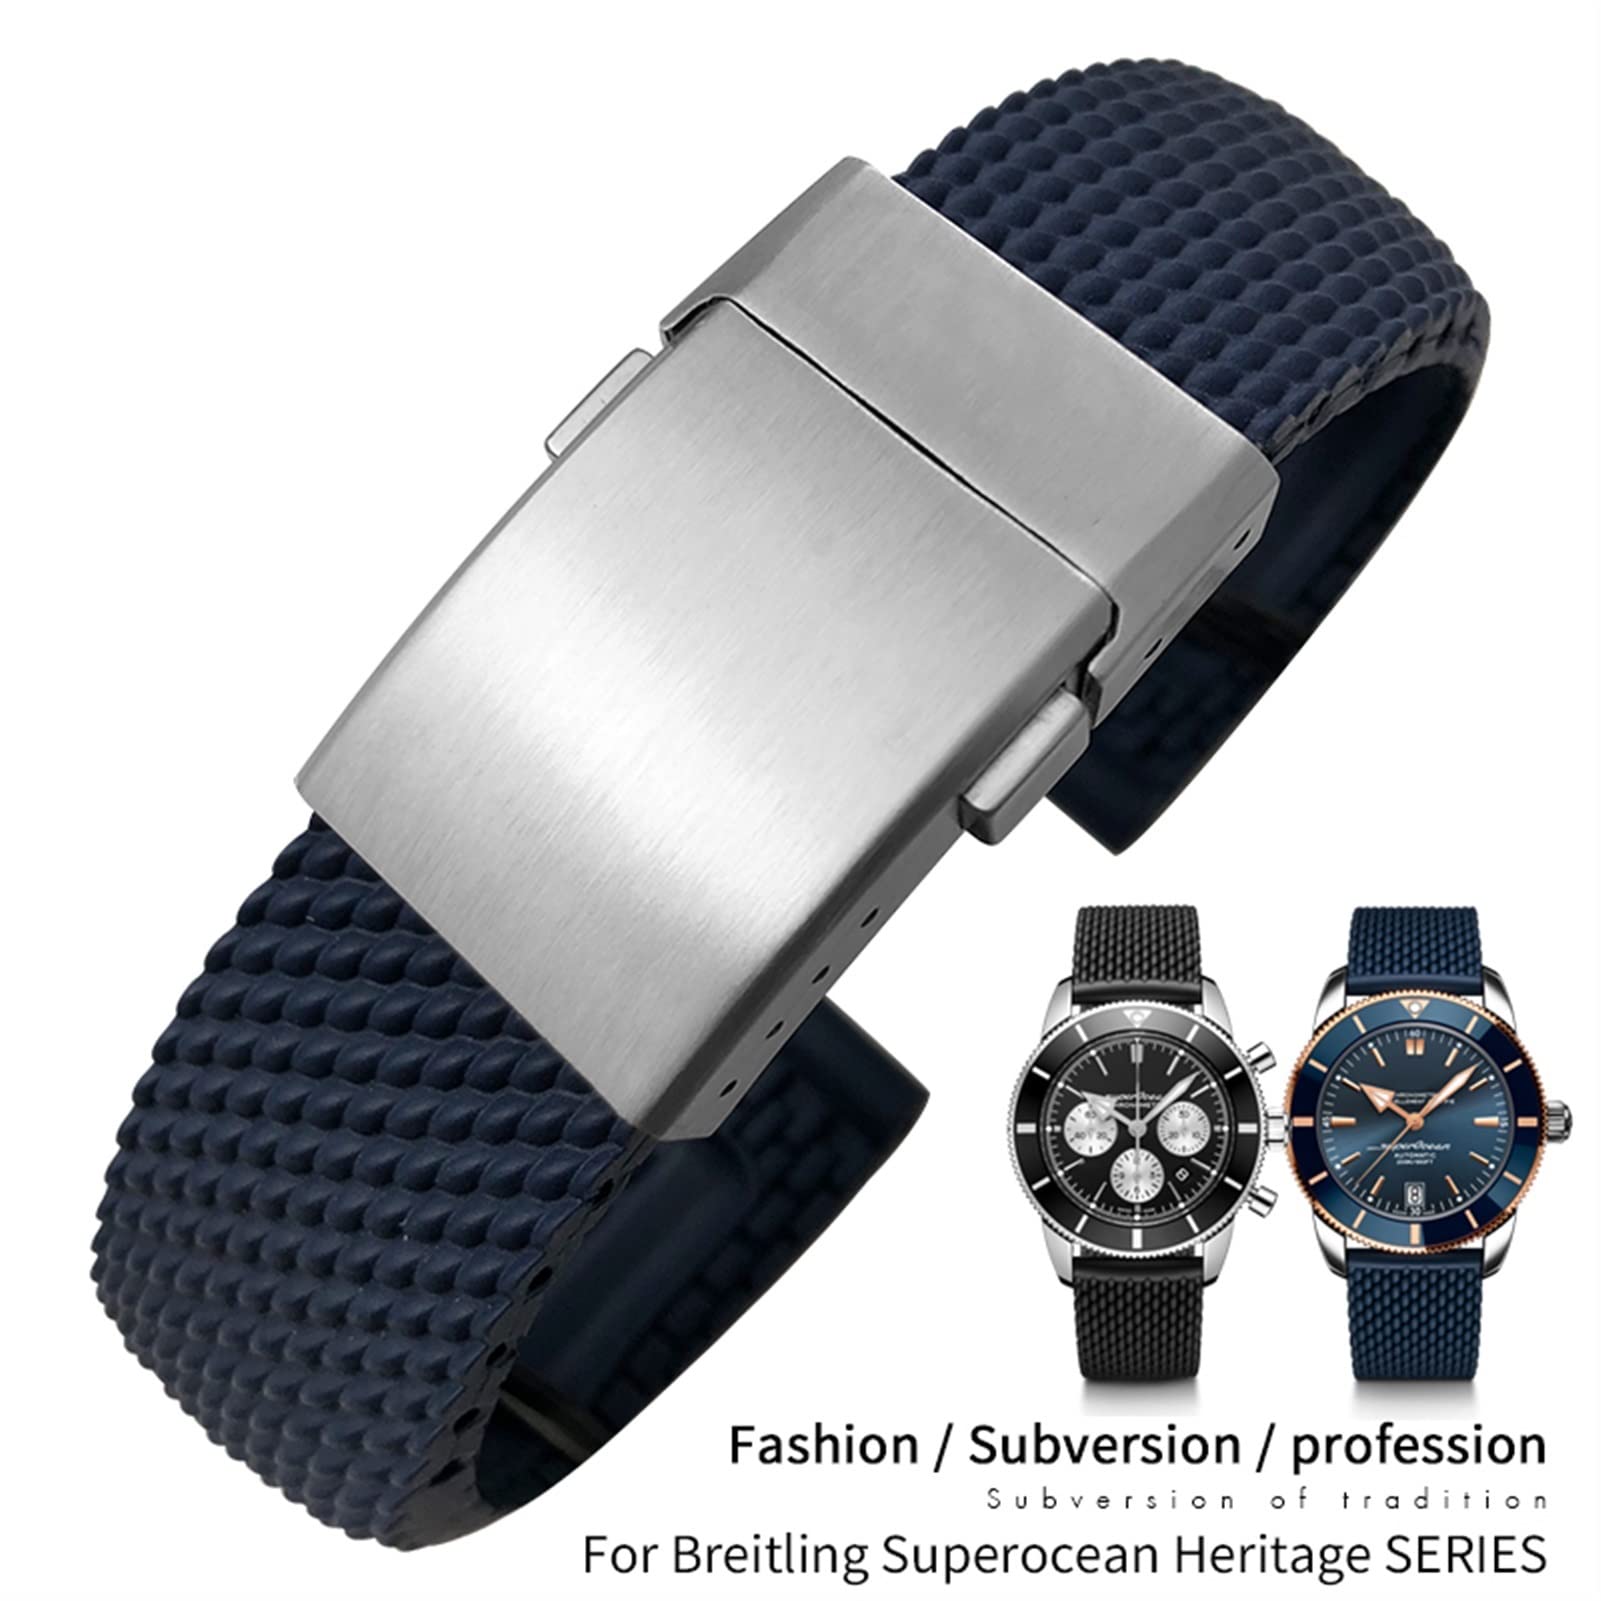 ANKANG 22mm 24mm Braided Silicone Rubber Watchband Replacement for Avenger Superocean Heritage Watch Strap Braceles (Color : Blue 1 Black, Size : 22mm)